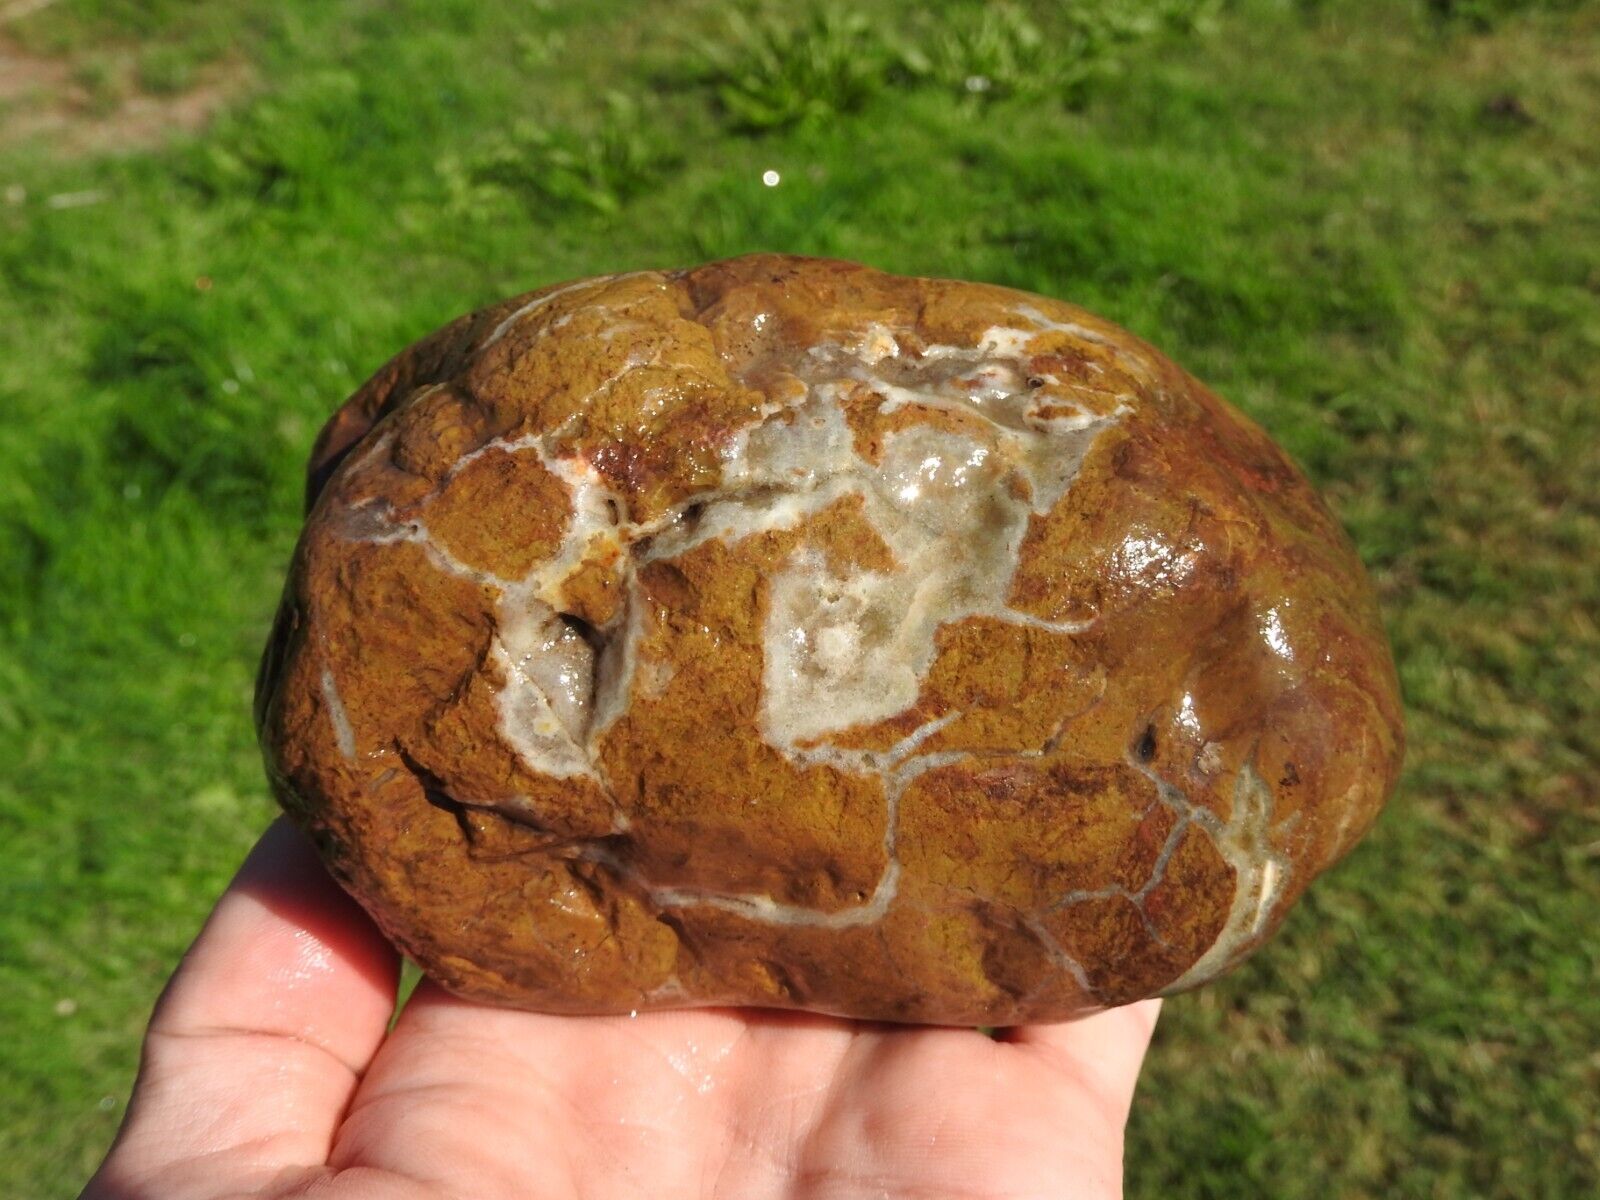 Banded RHYOLITE Beach, River Rock MARBLED, Fortified Agate Banding RARE 2lbs+